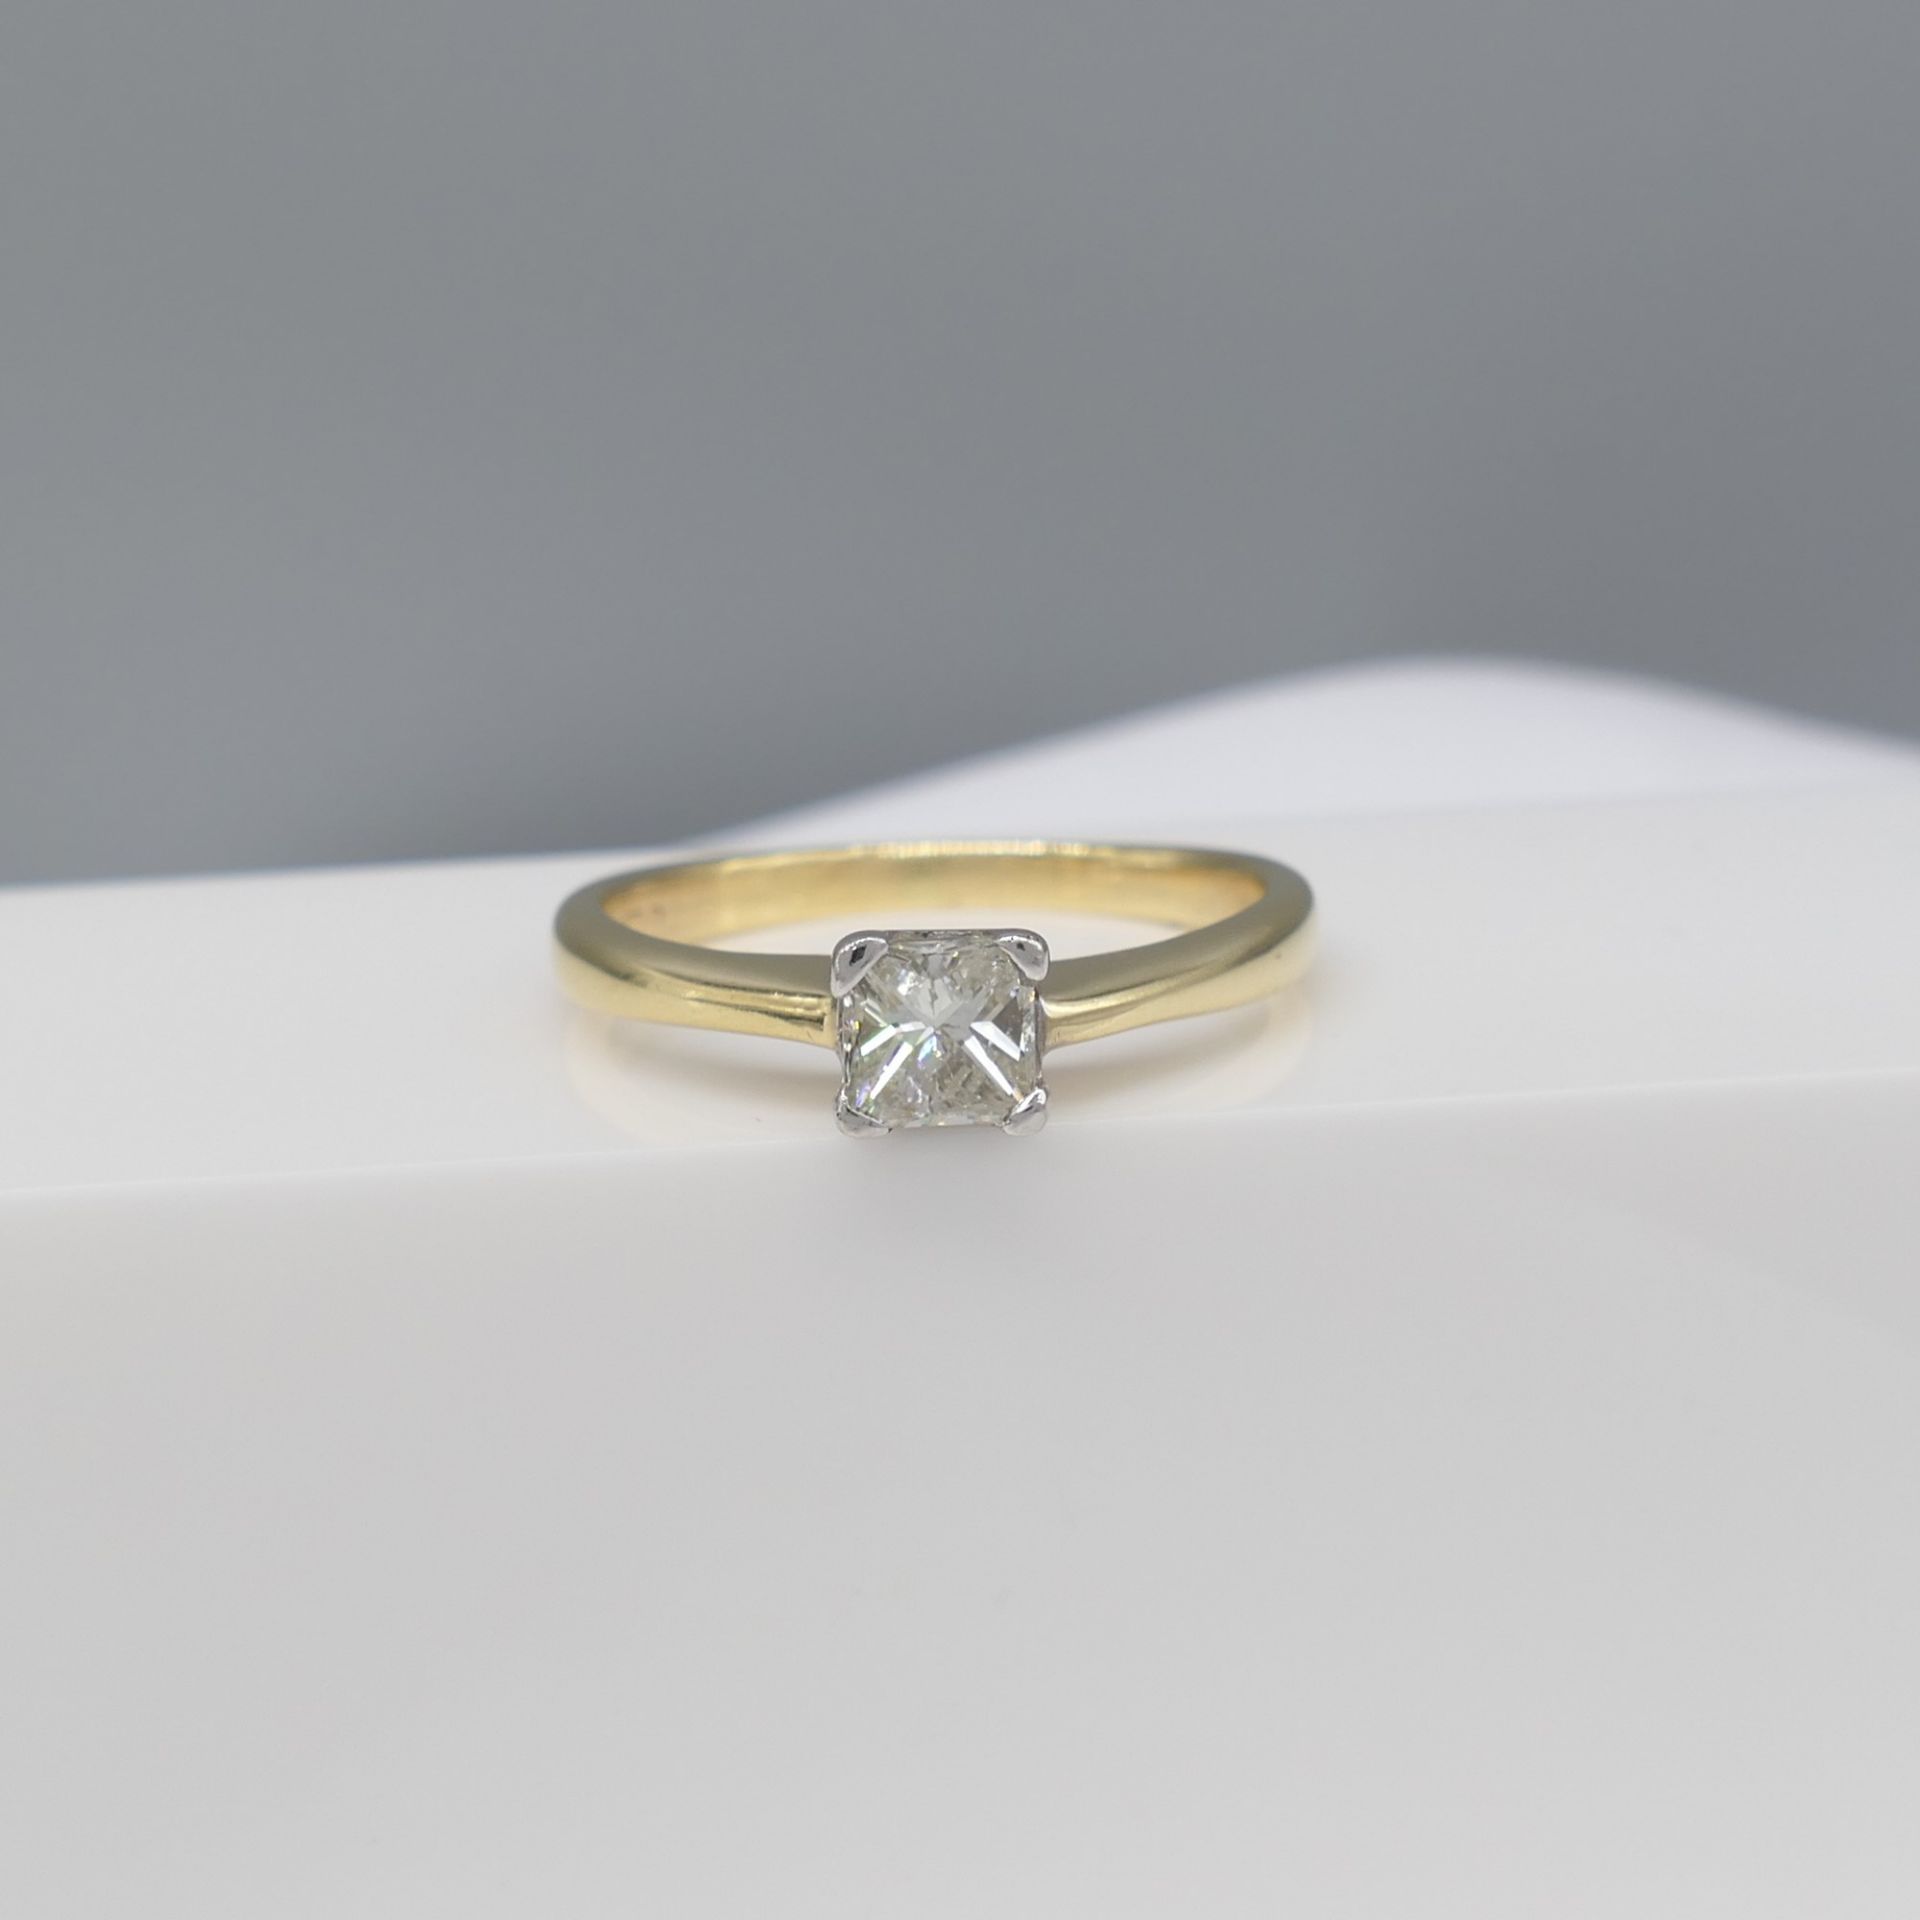 Square princess-cut 0.52 carat diamond solitaire ring in 18ct gold, with report - Image 6 of 7